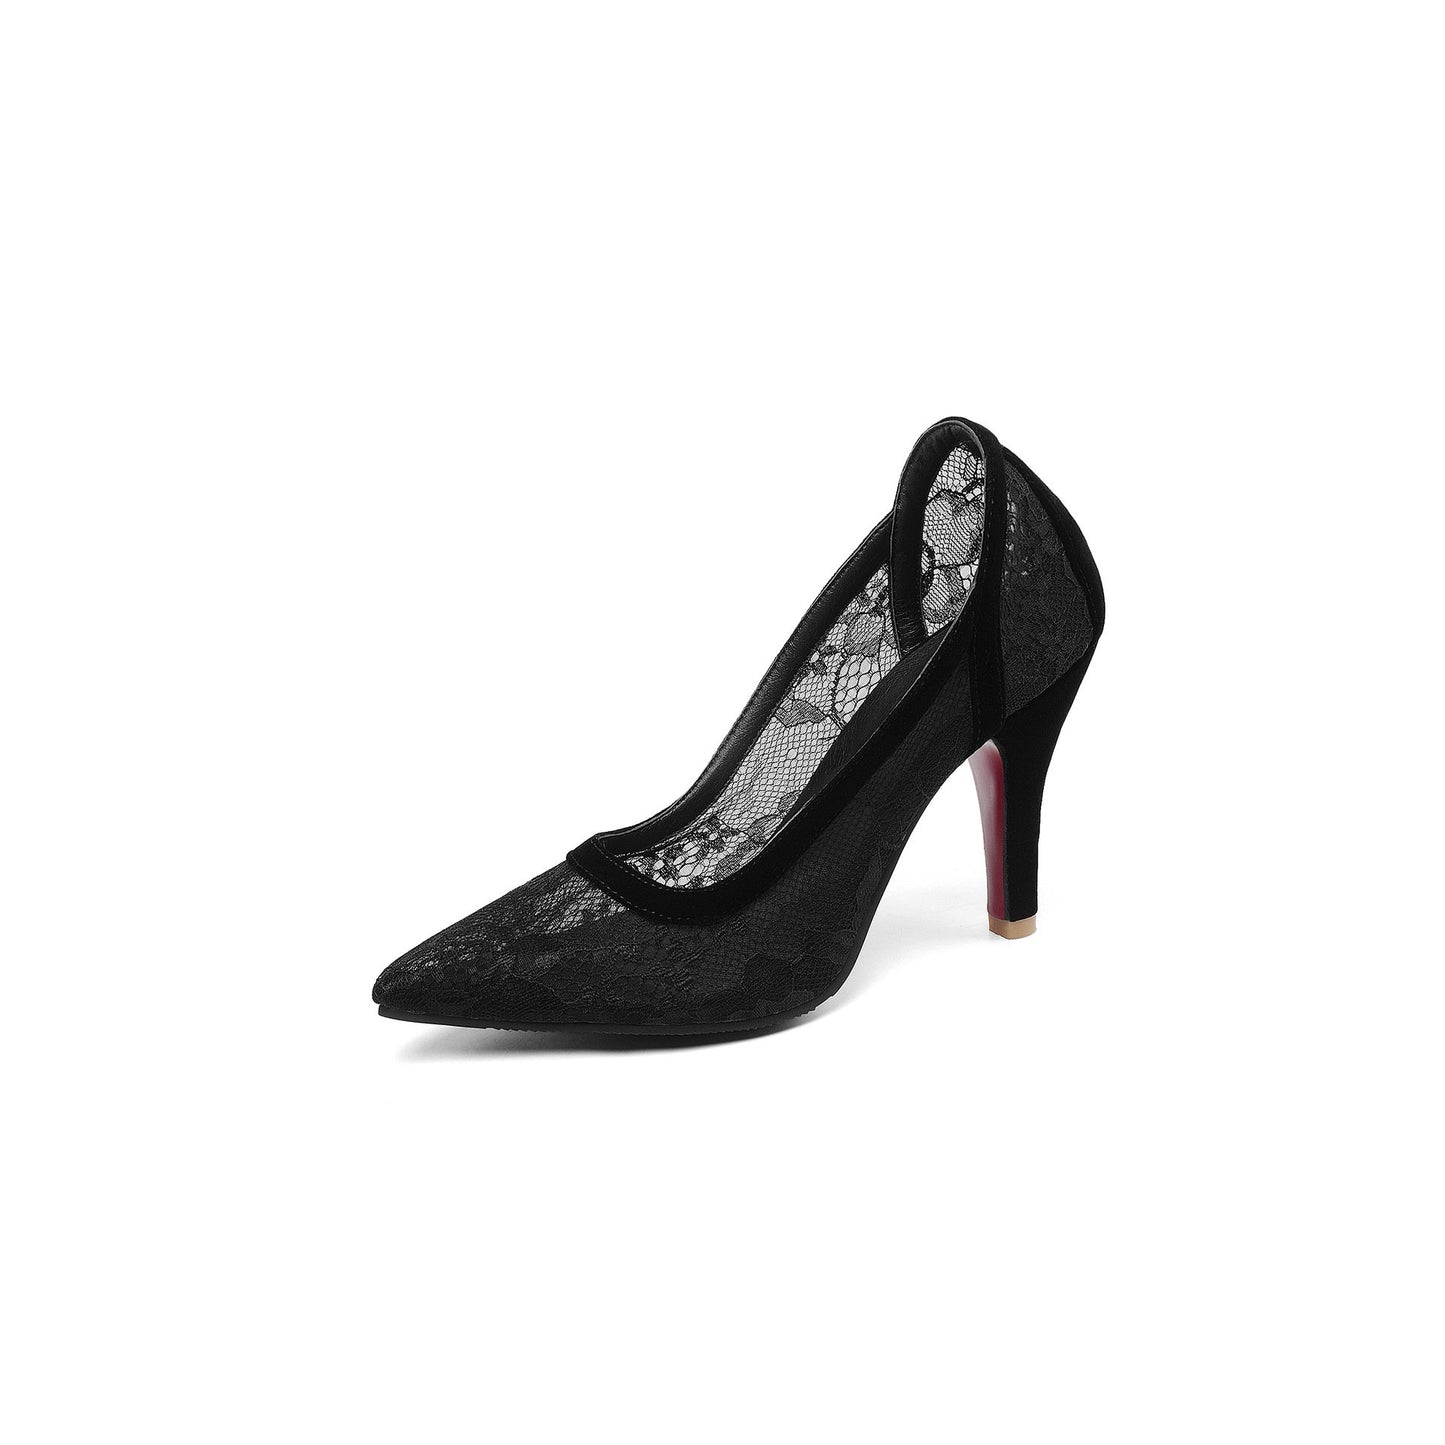 Lady Pointed Toe High-heel HollowOut Woman Pumps Stiletto Heel Shoes